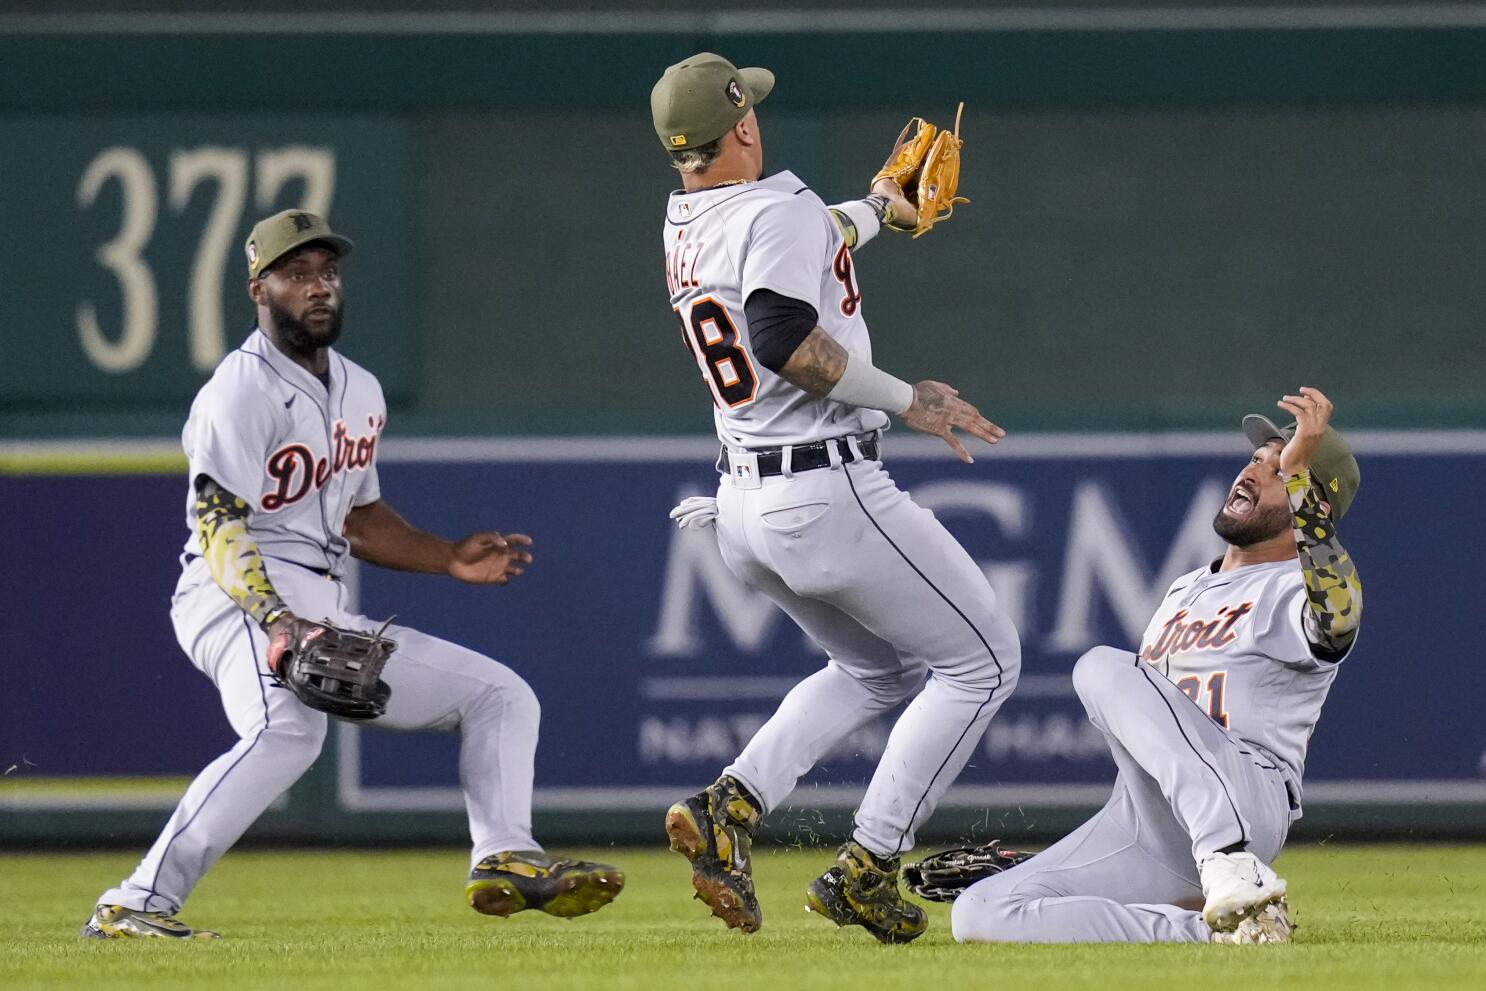 Baddoo homers, drives in 4, Tigers outlast Nationals 8-6 - The San